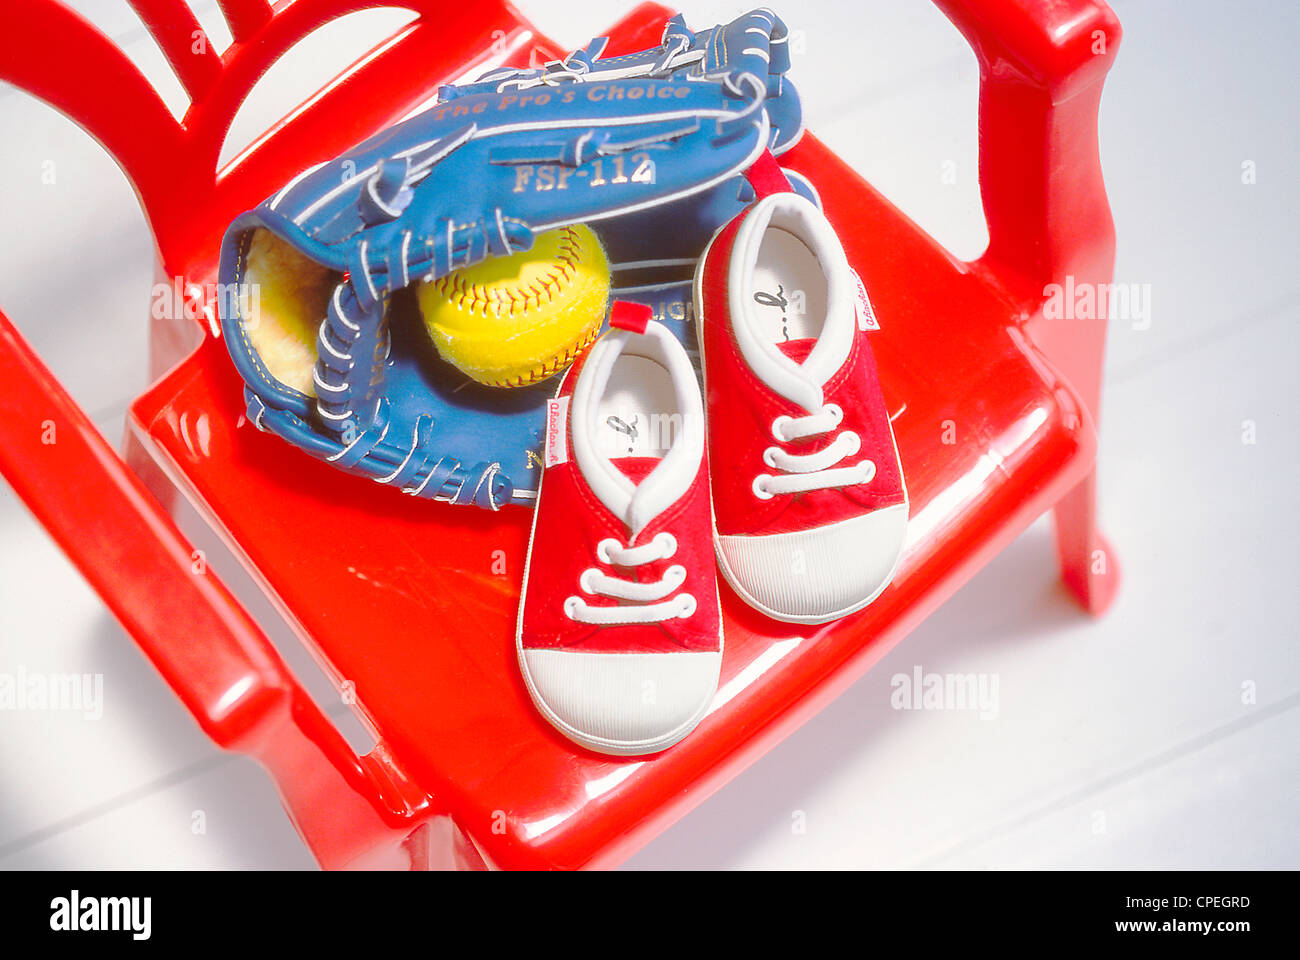 Baby Shoes, Baseball And Baseball Glove On Red Chair Stock Photo